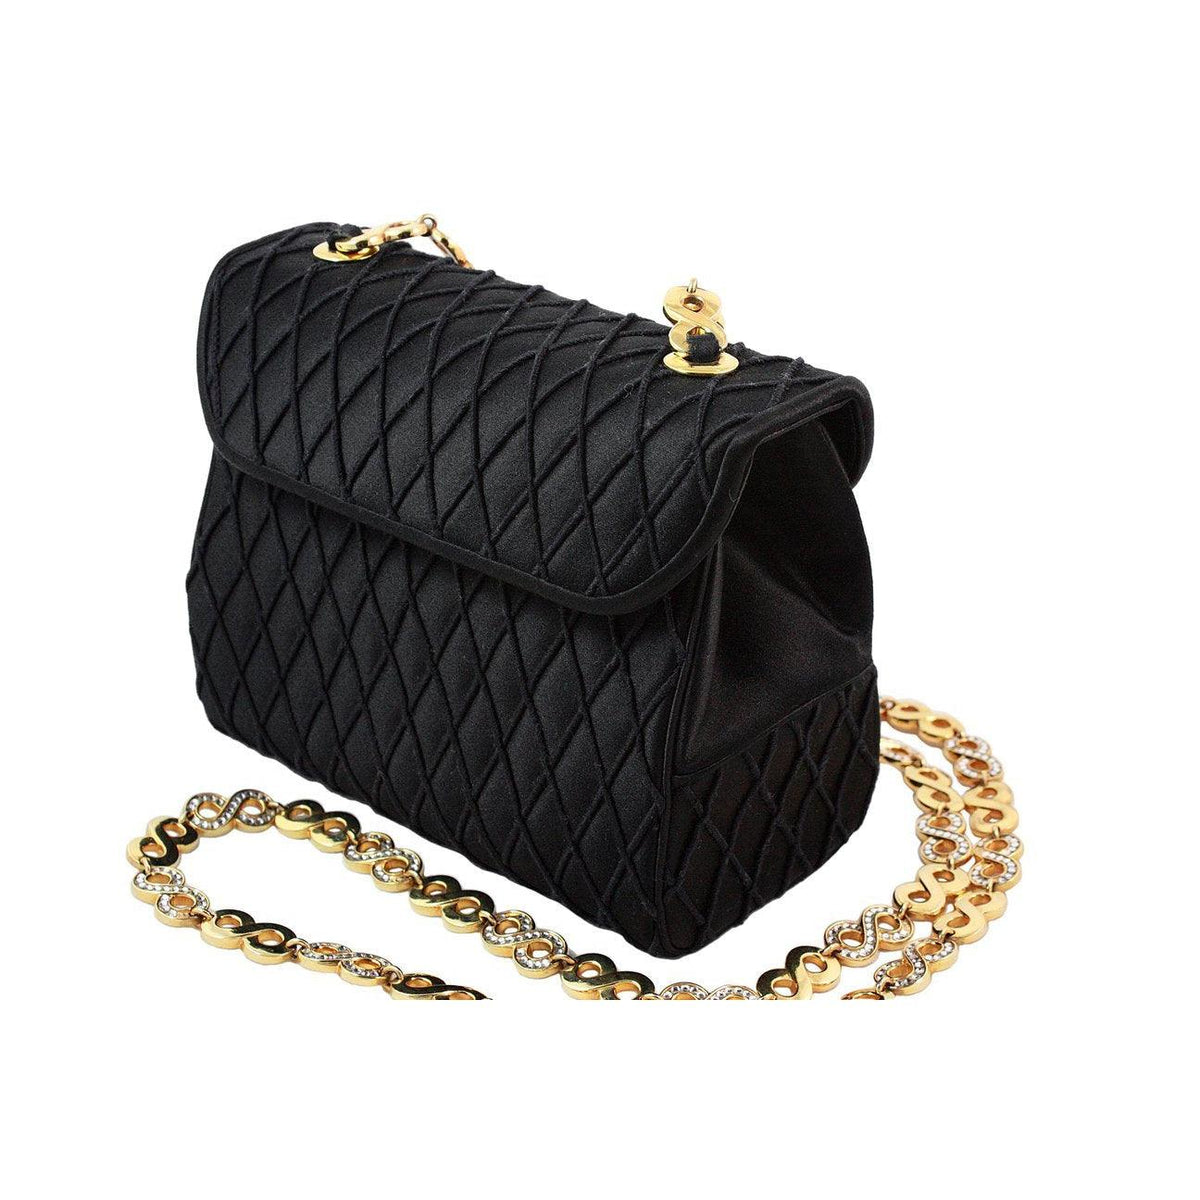 Chanel - Authenticated Chain Infinity Handbag - Leather Black Plain for Women, Very Good Condition